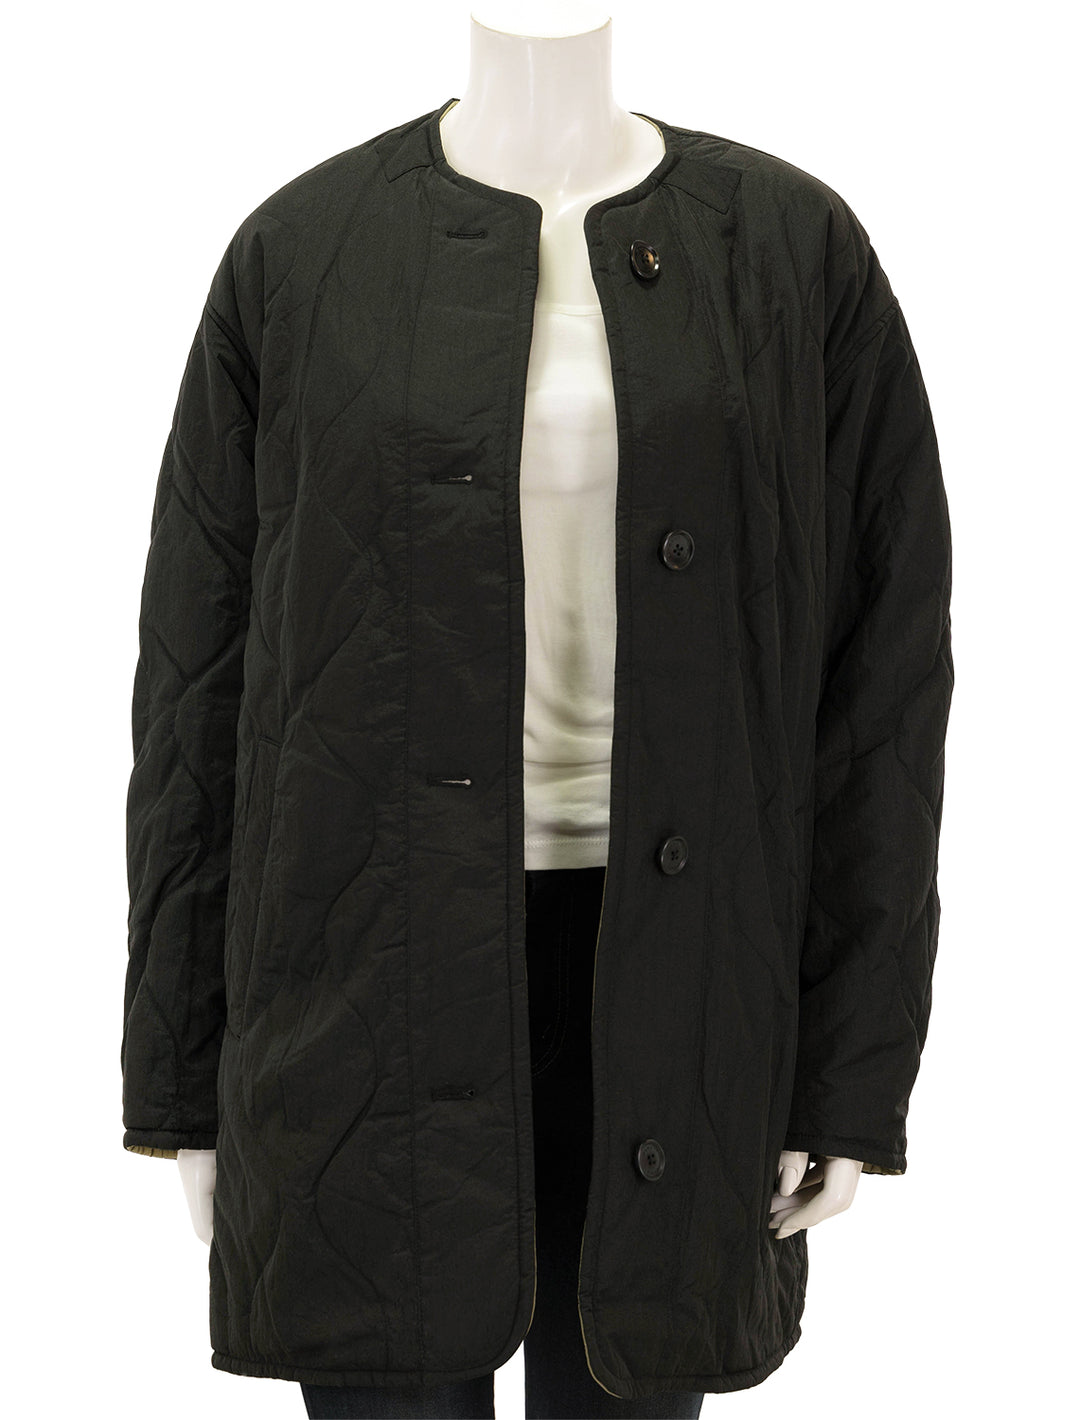 Front view of Isabel Marant Etoile's nesma jacket in black, unbuttoned.